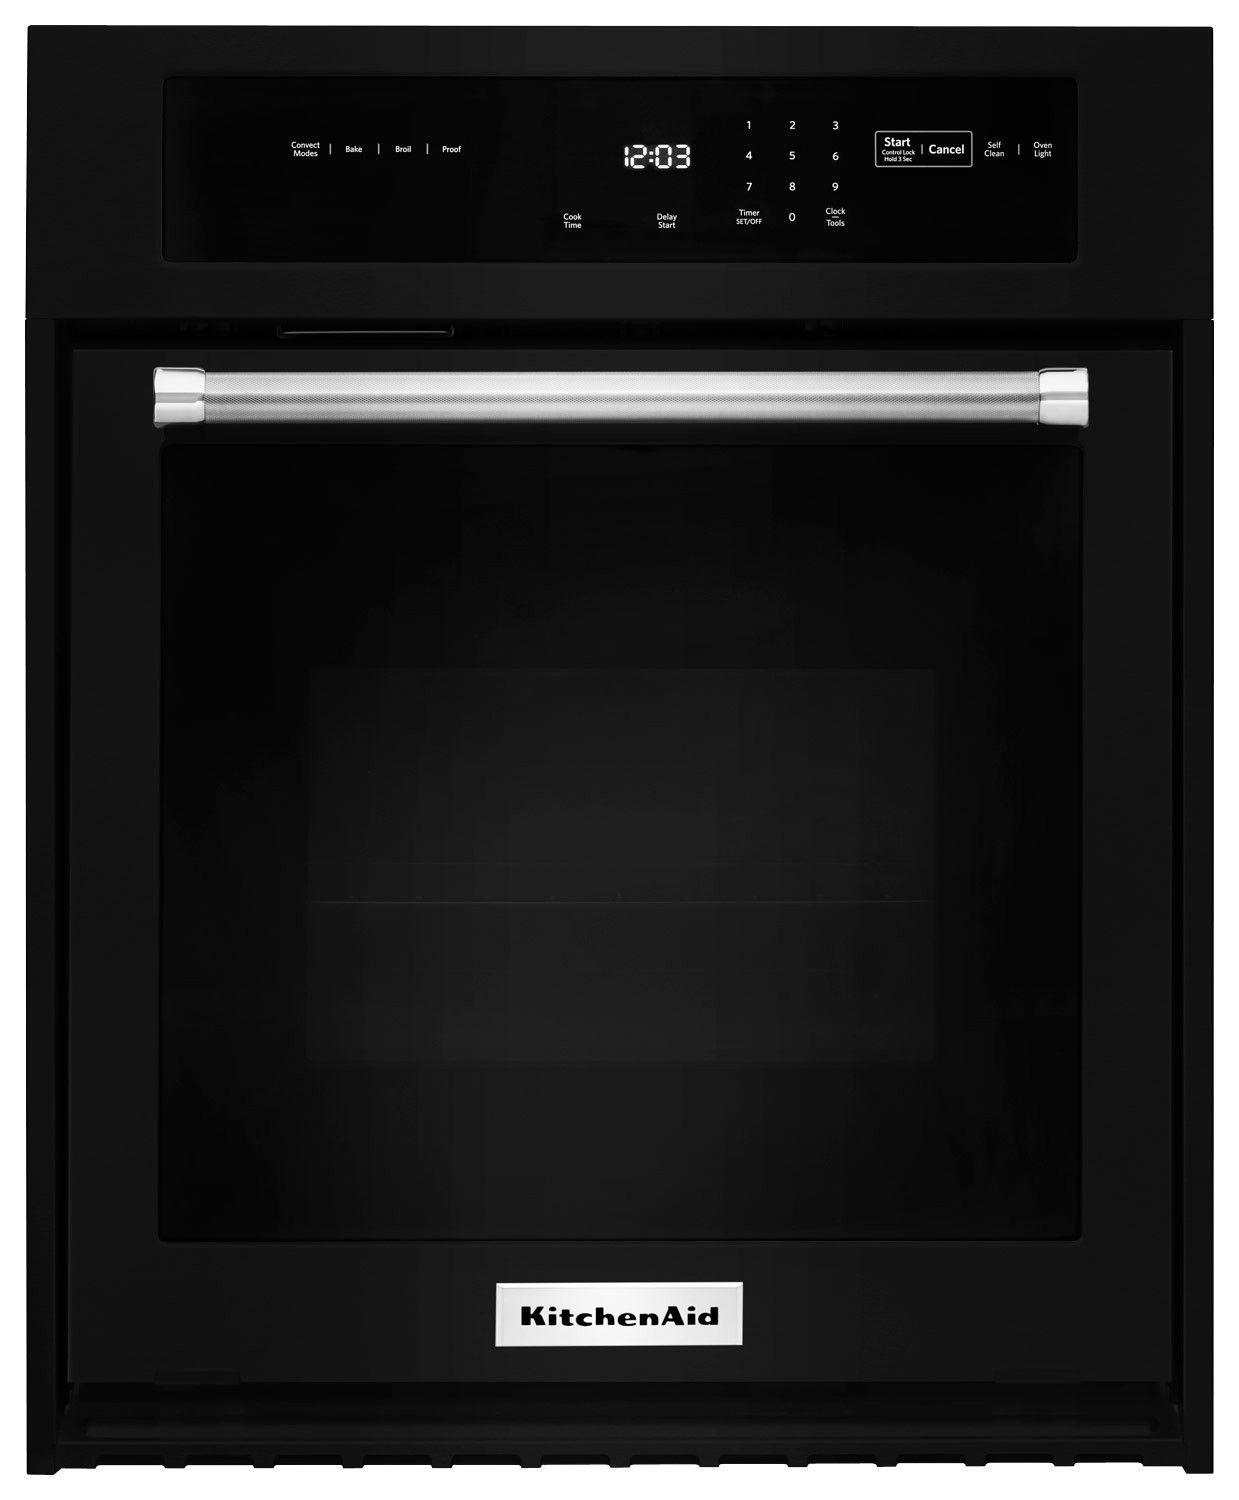 Kitchen Aid Wall Oven
 KitchenAid 30" Built In Single Electric Convection Wall